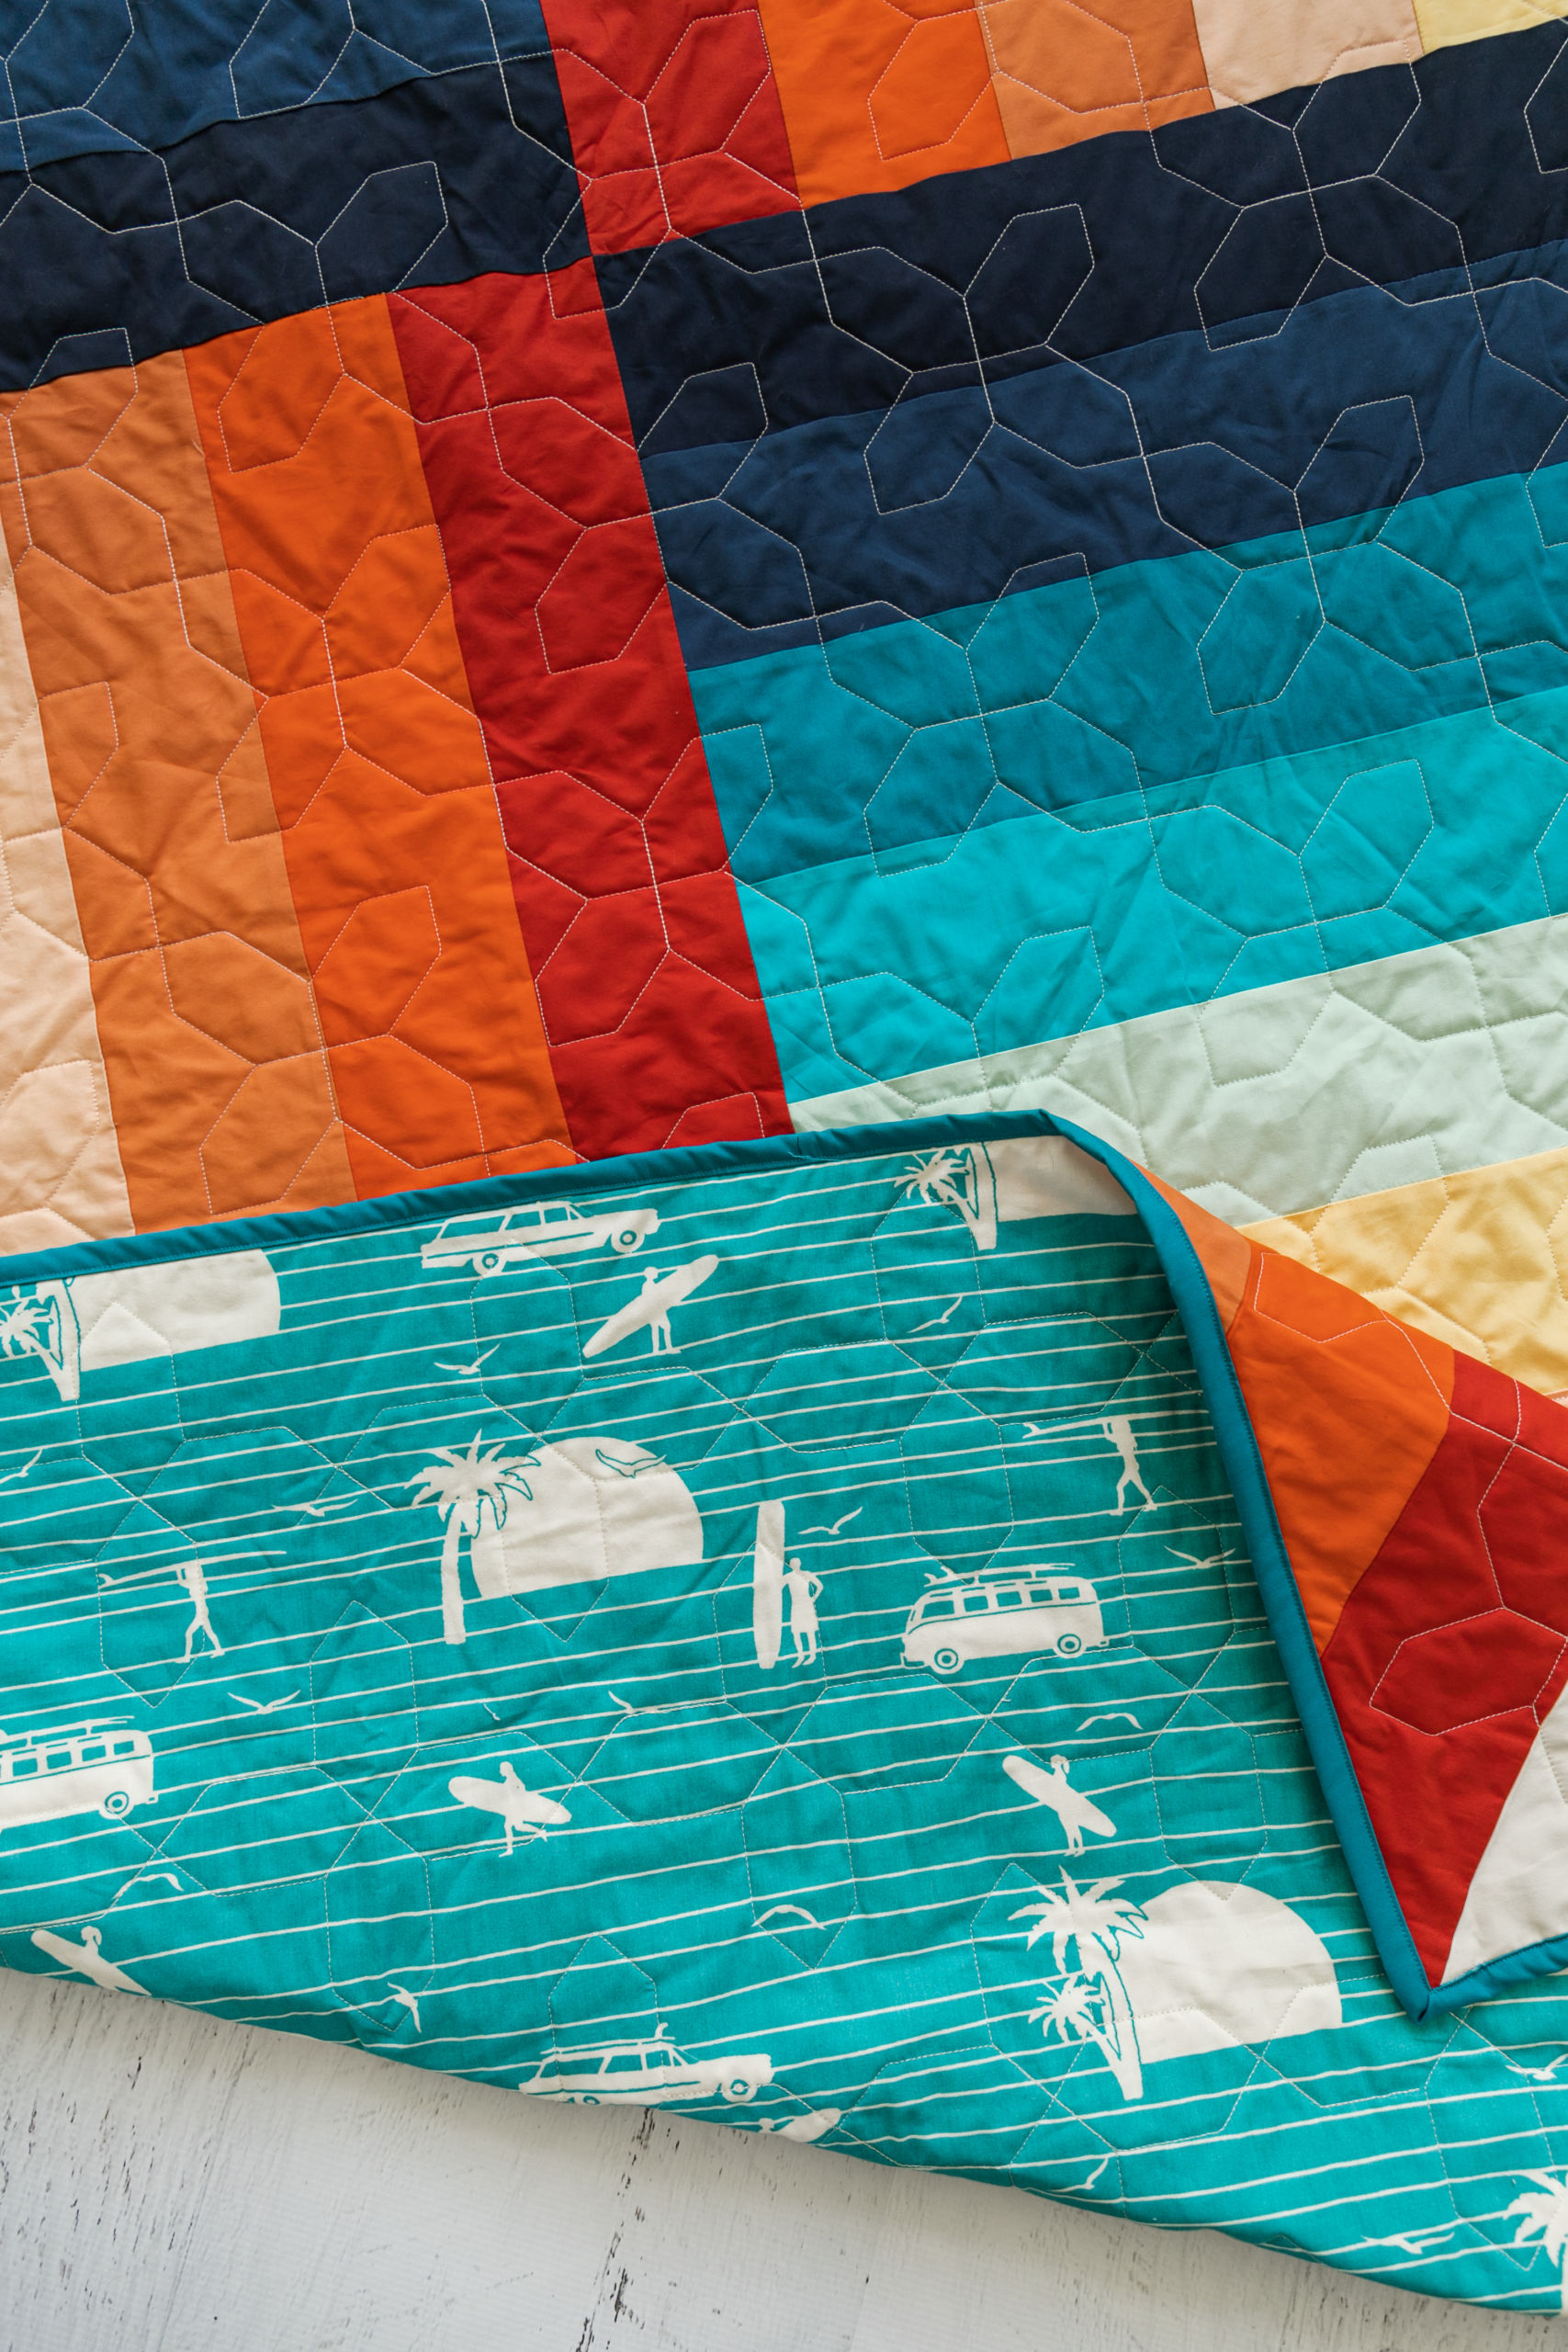 Get inspired to make your Adventureland quilt with endless color options! suzyquilts.com #quilting #quiltpattern